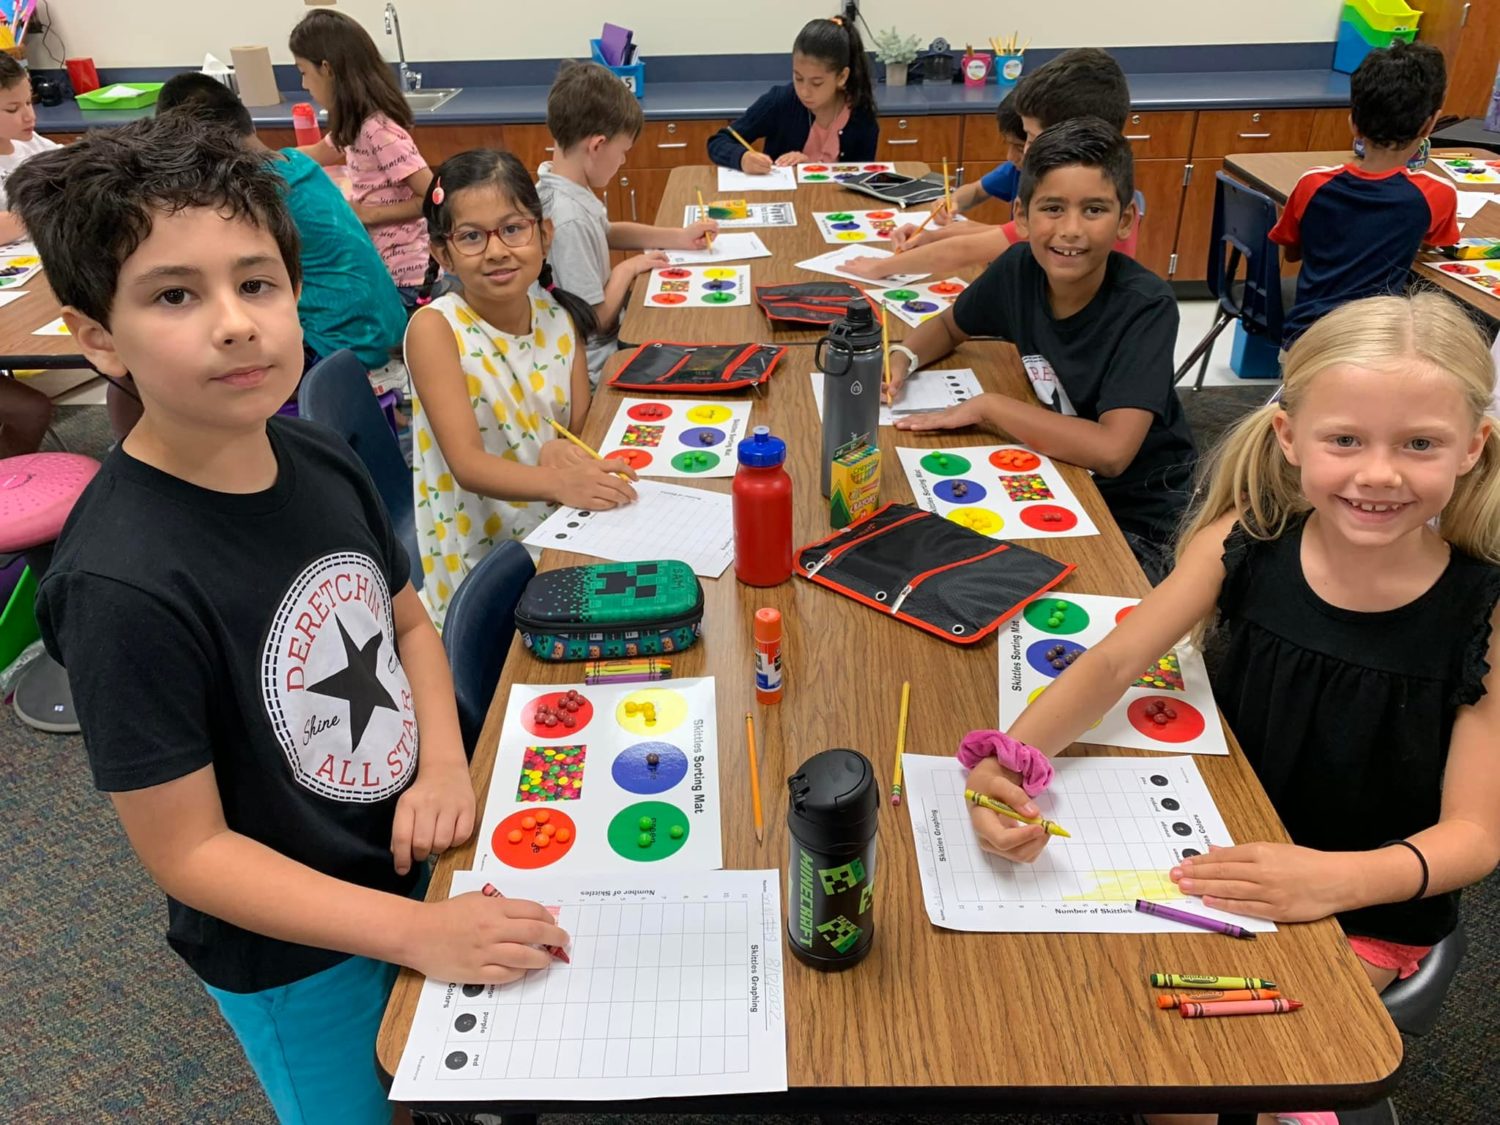 Students smile while practicing sorting skills with colorful candies!